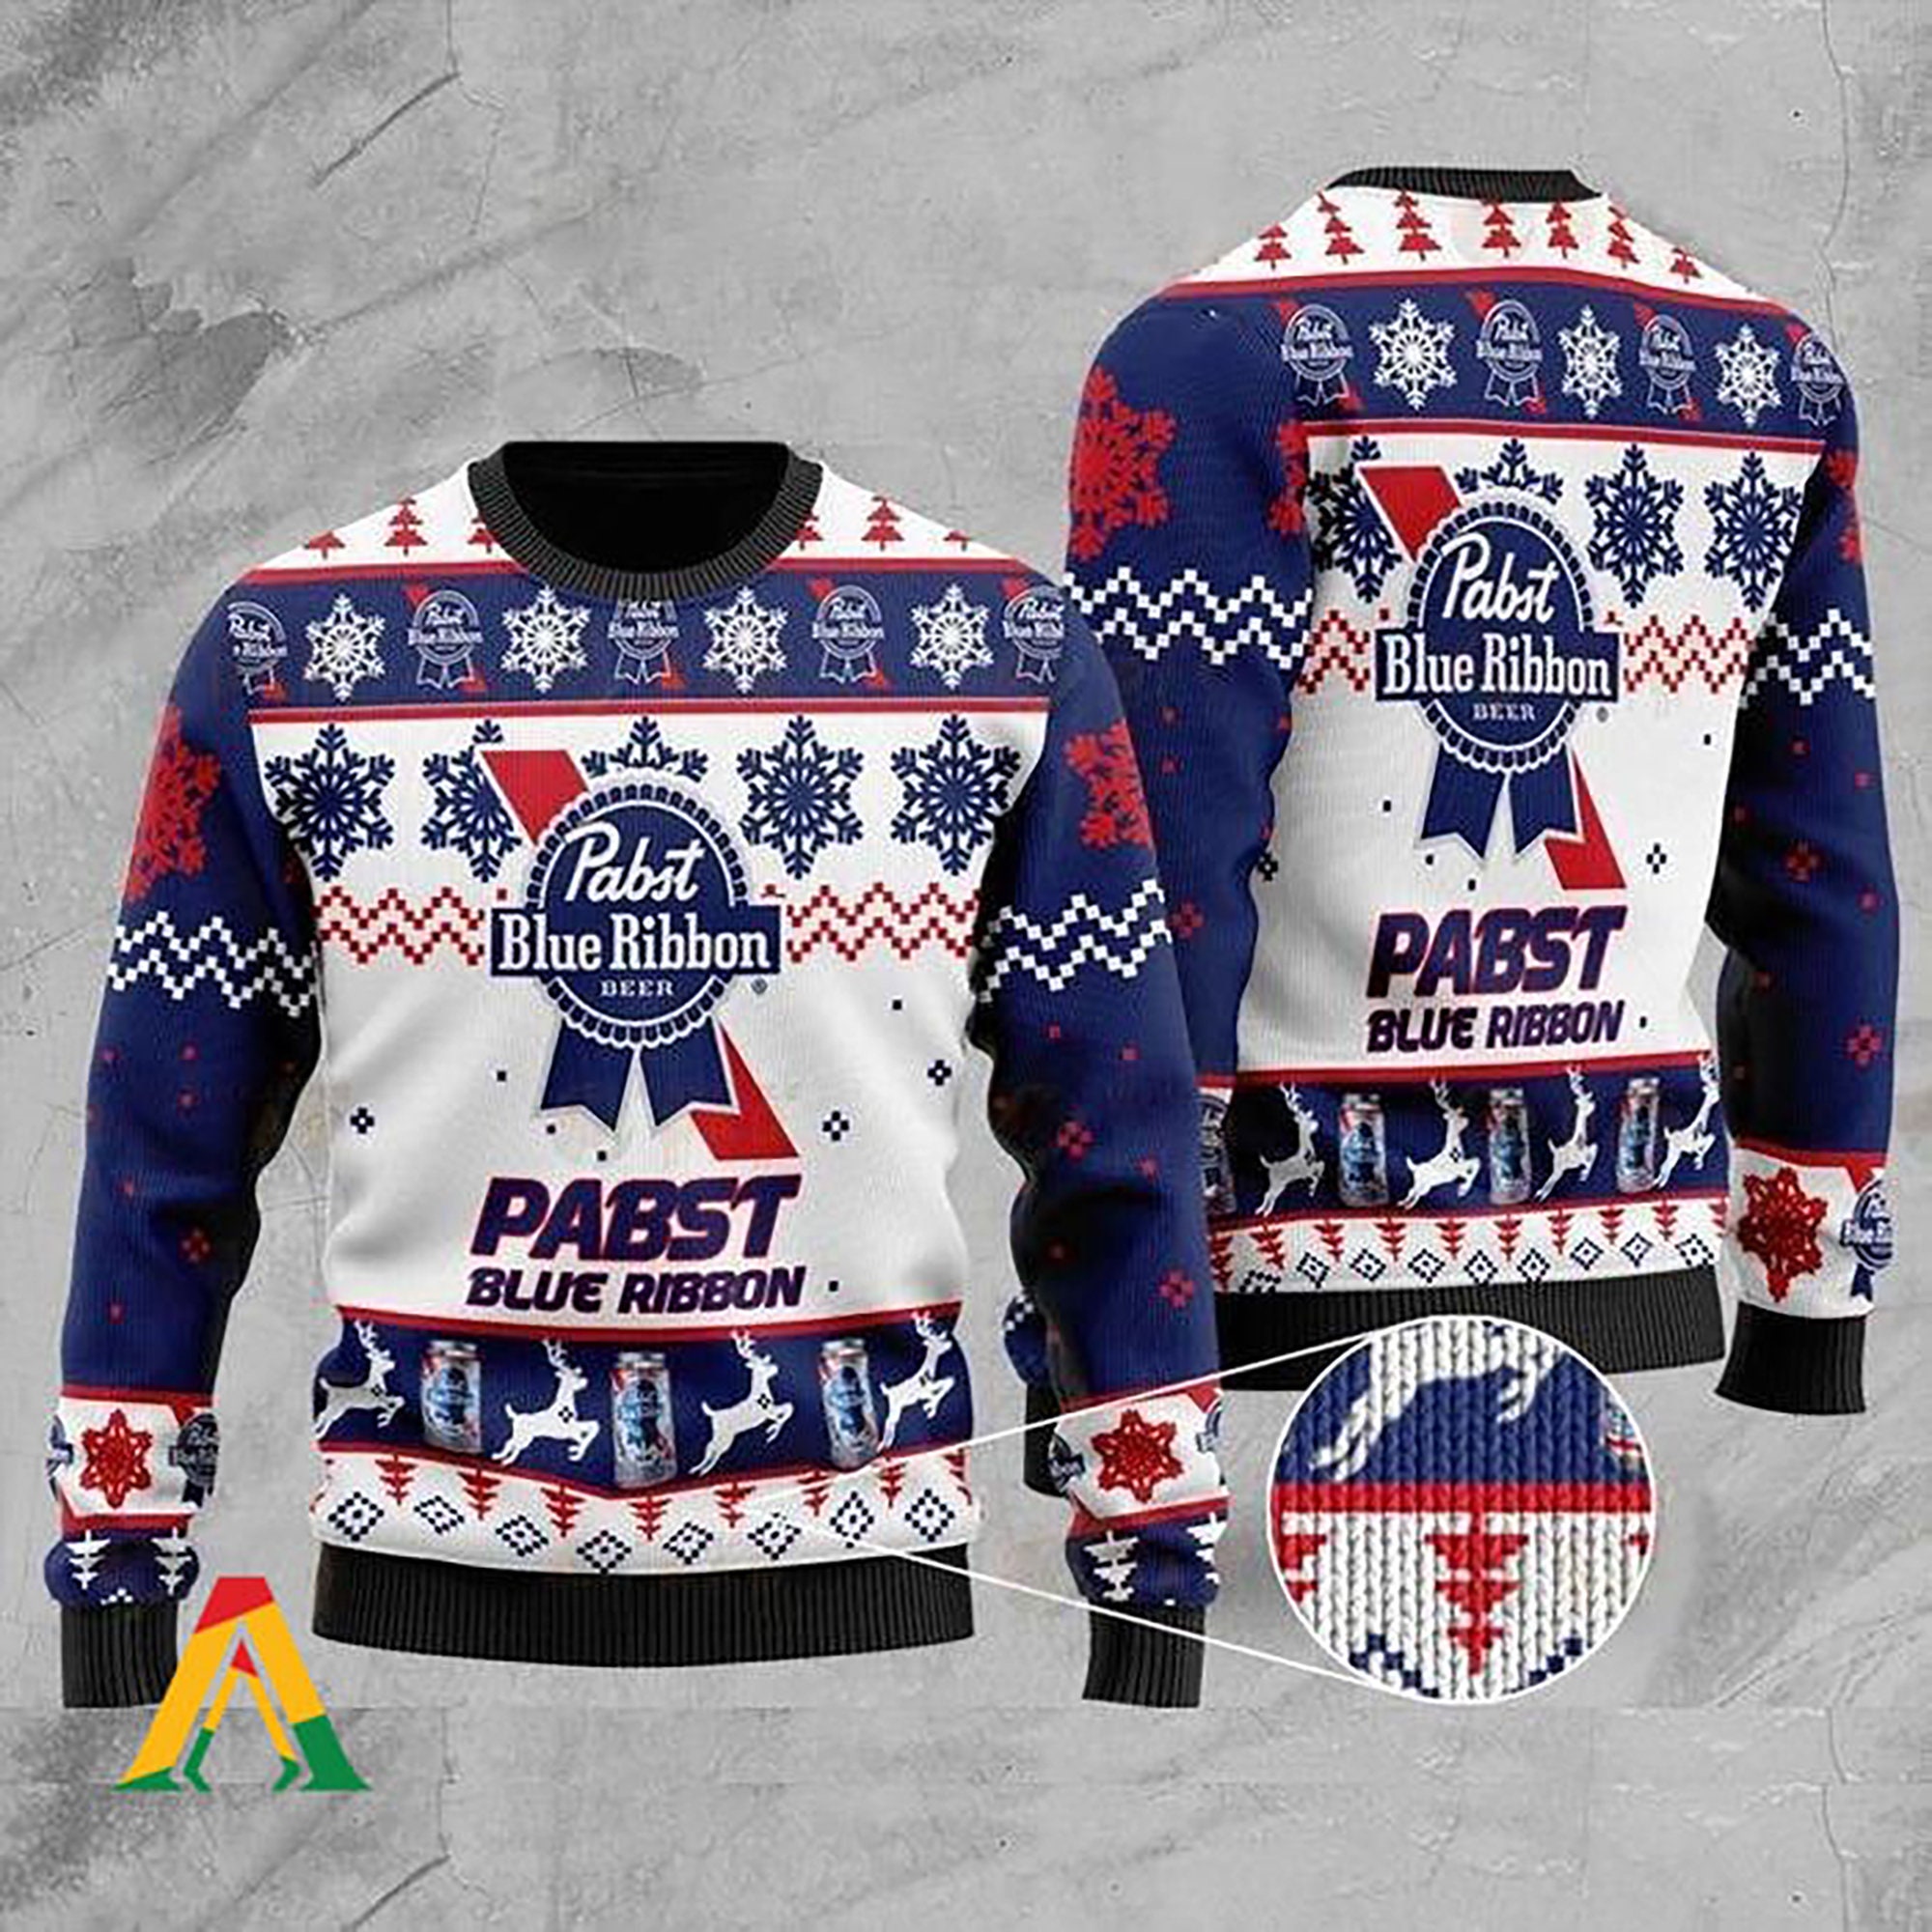 Pabst Blue Ribbon Beer Knitted Ugly Christmas Sweater